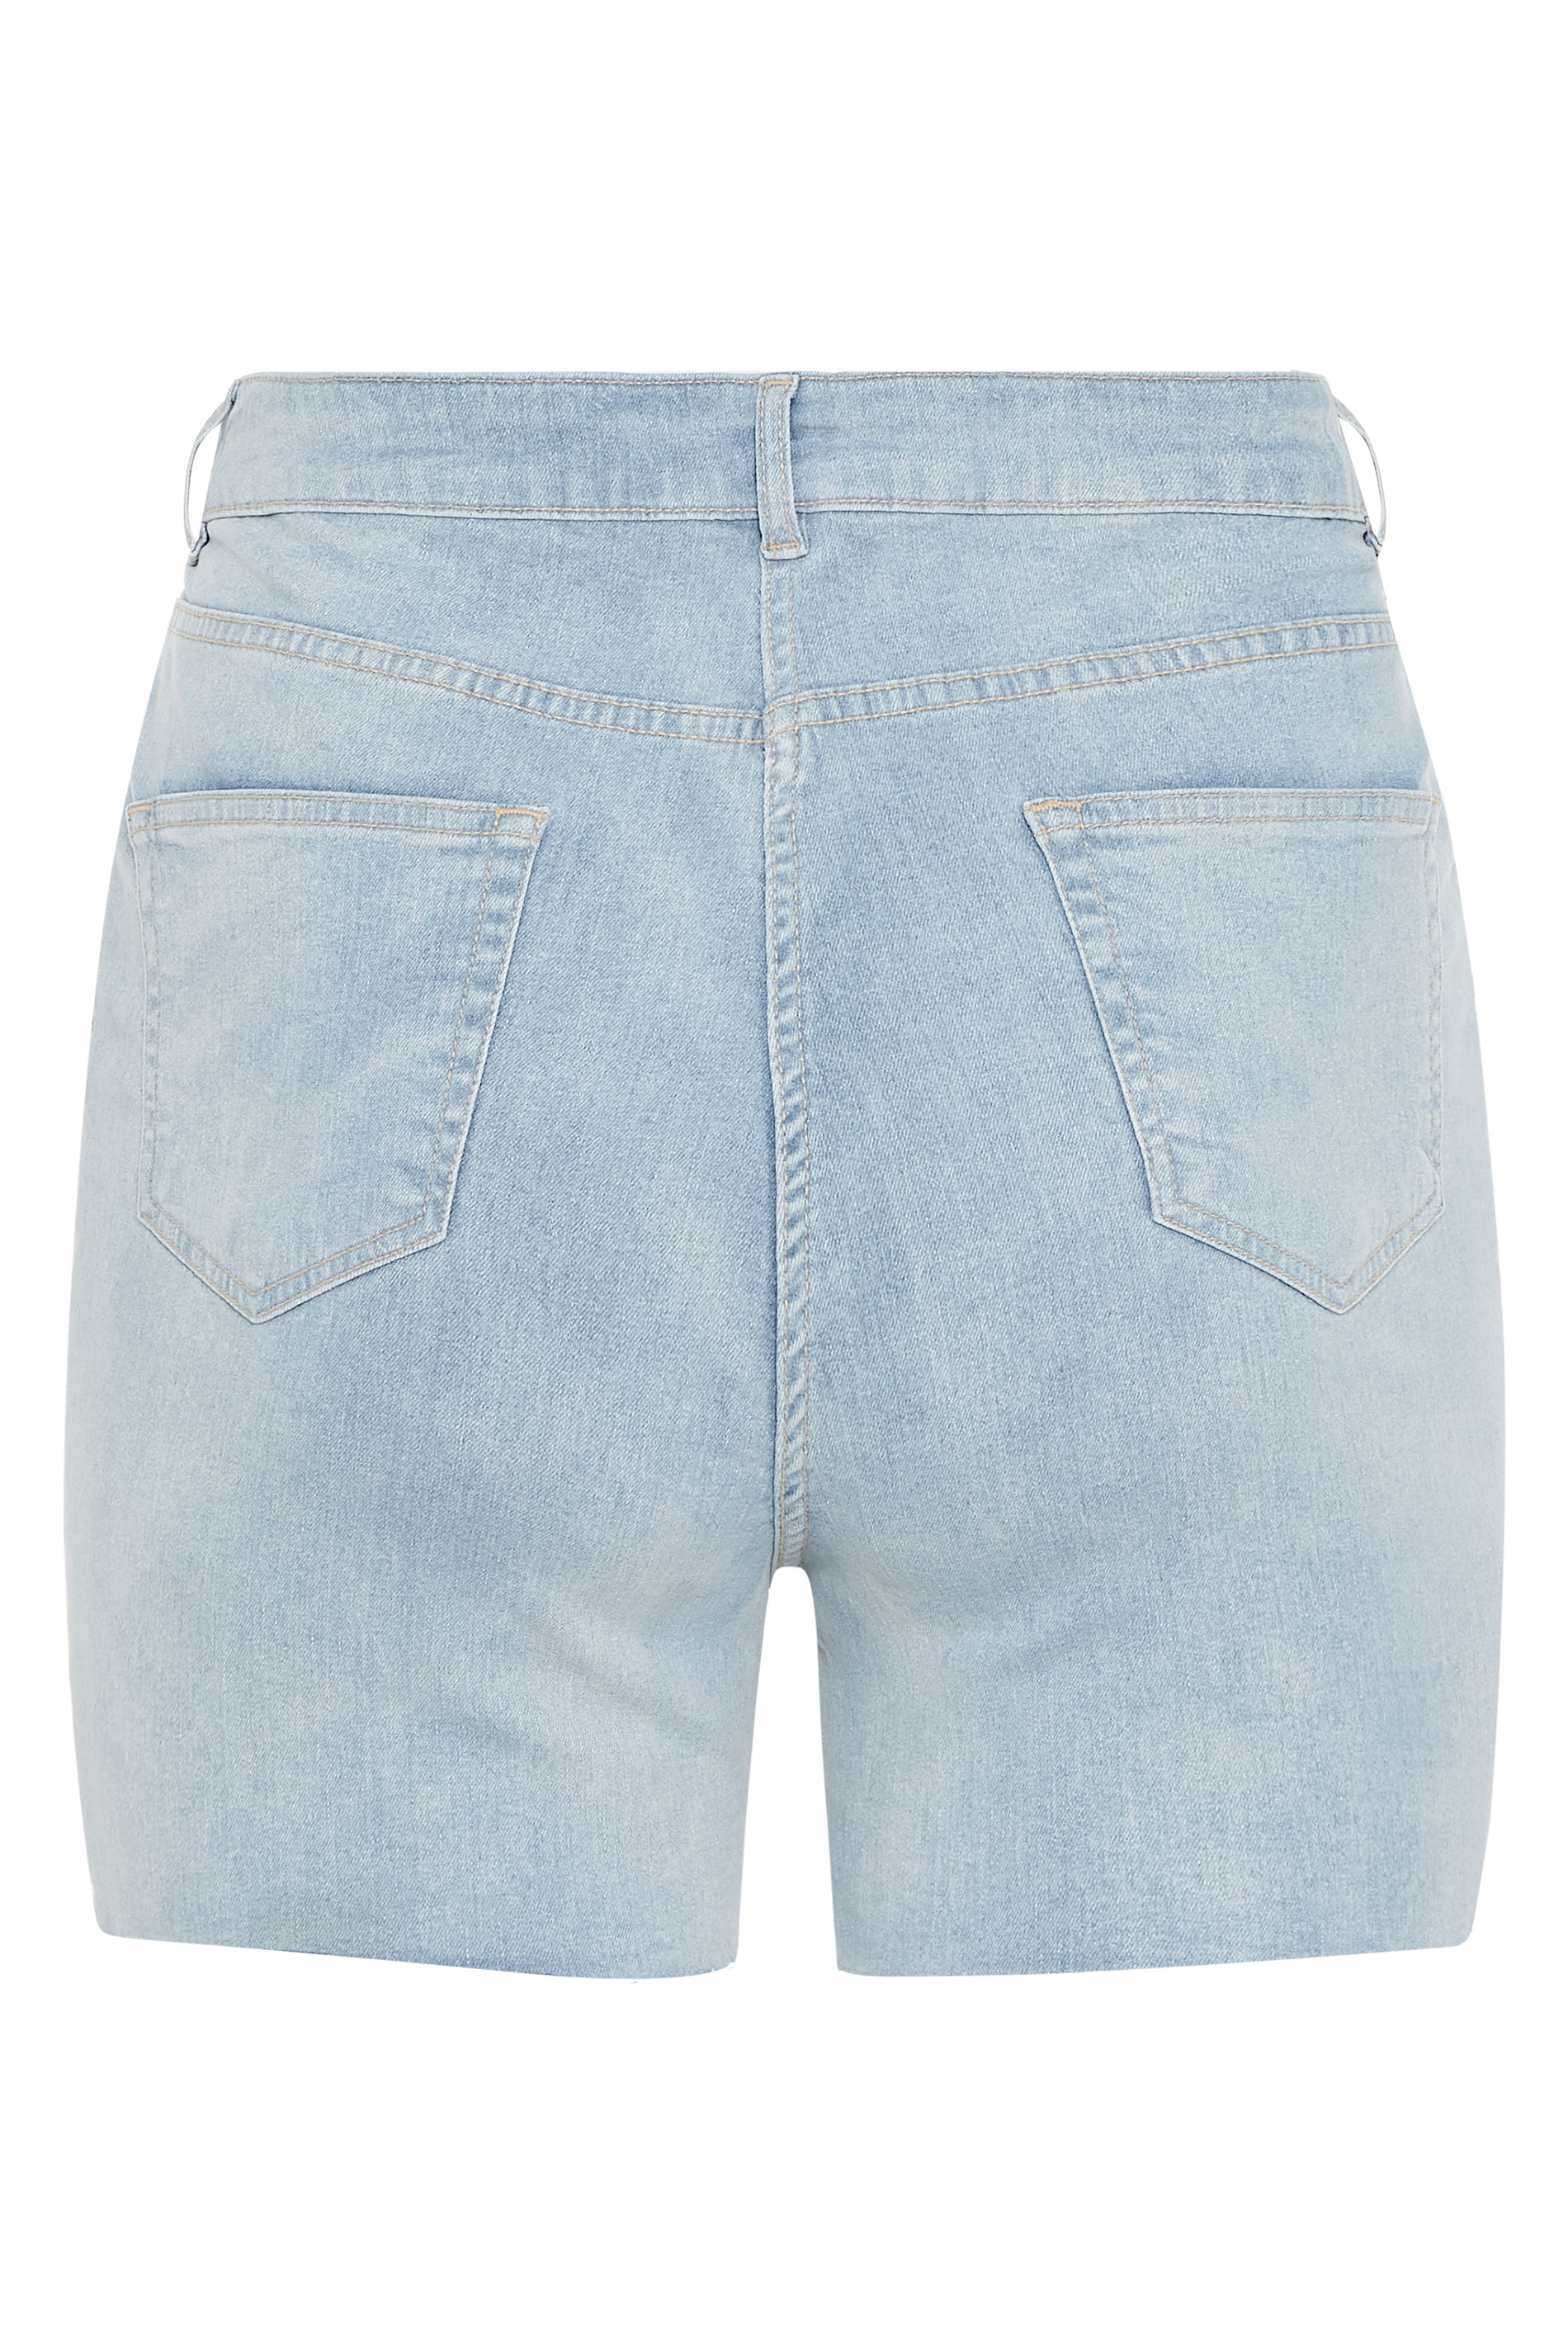 Light Blue Cut Off Distressed Denim Shorts | Yours Clothing